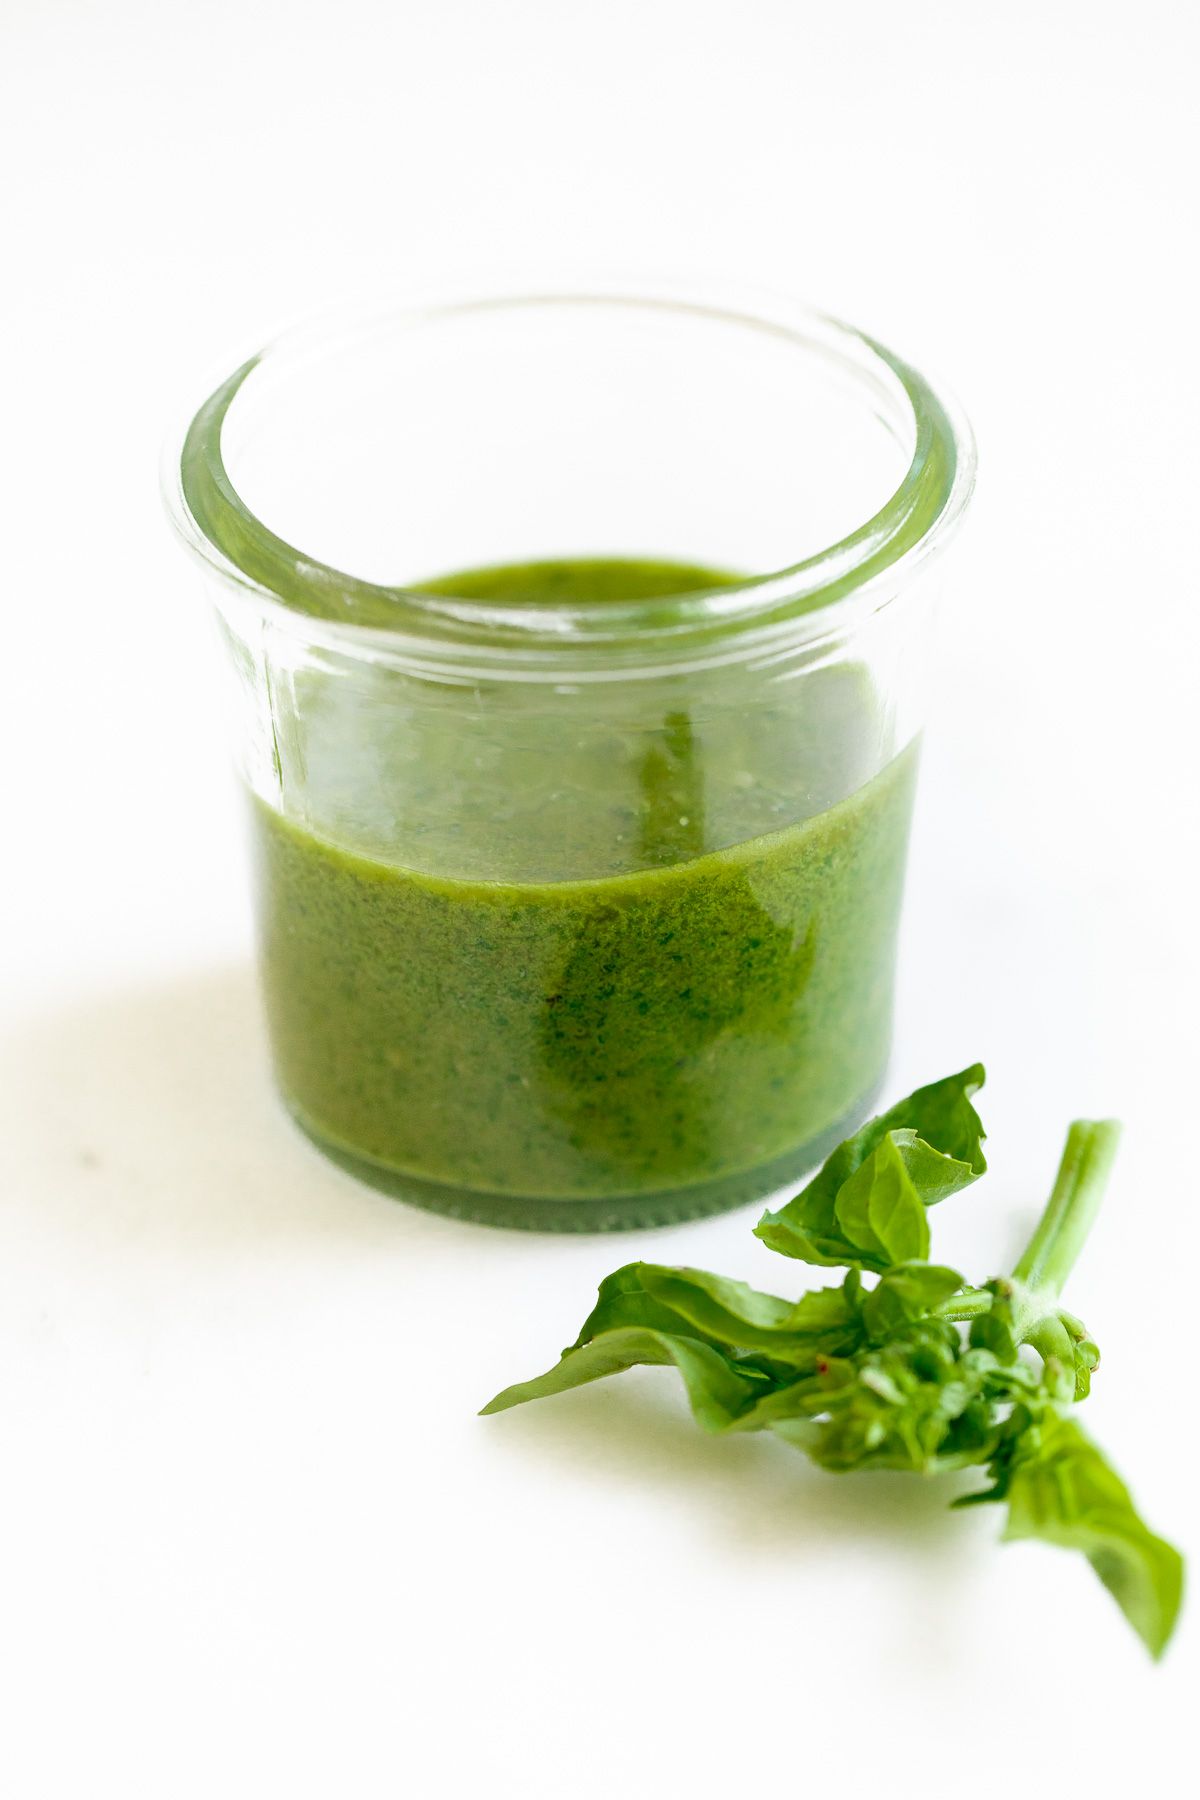 Fresh basil pesto in a small glass jar, with a stem of basil next to it on a white surface. 